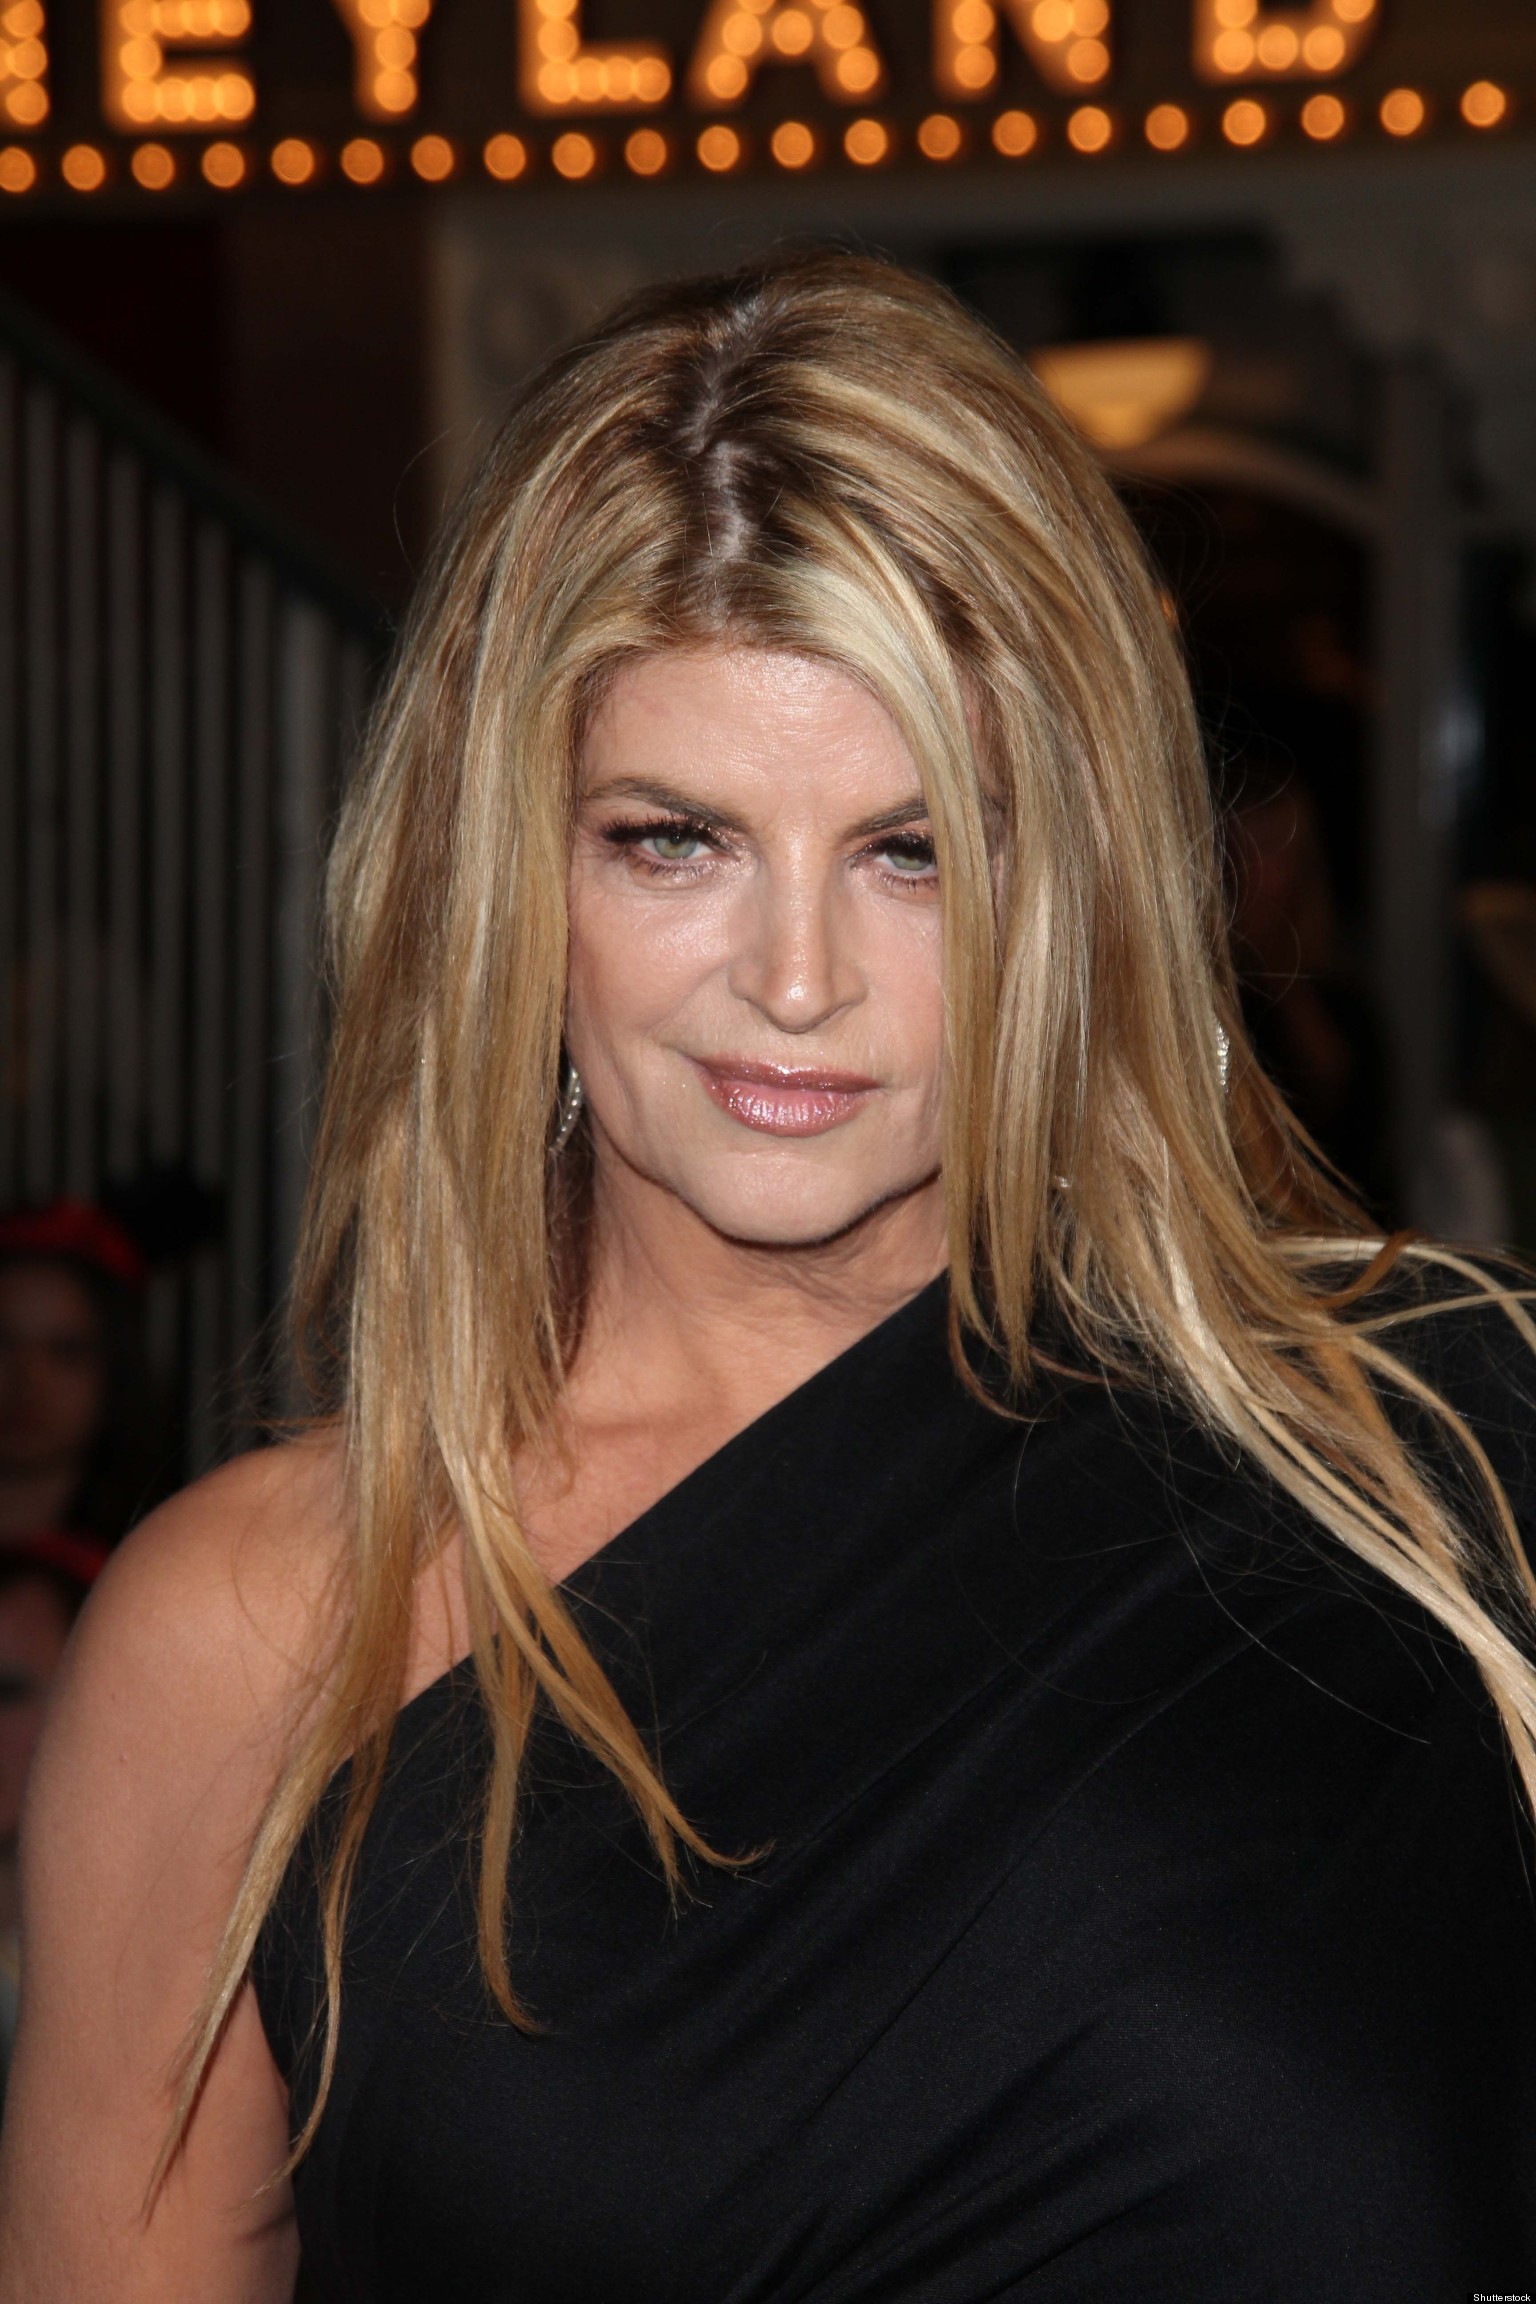 Kirstie Alley: A Look At The Actress' Best Quotes For Her Birthday